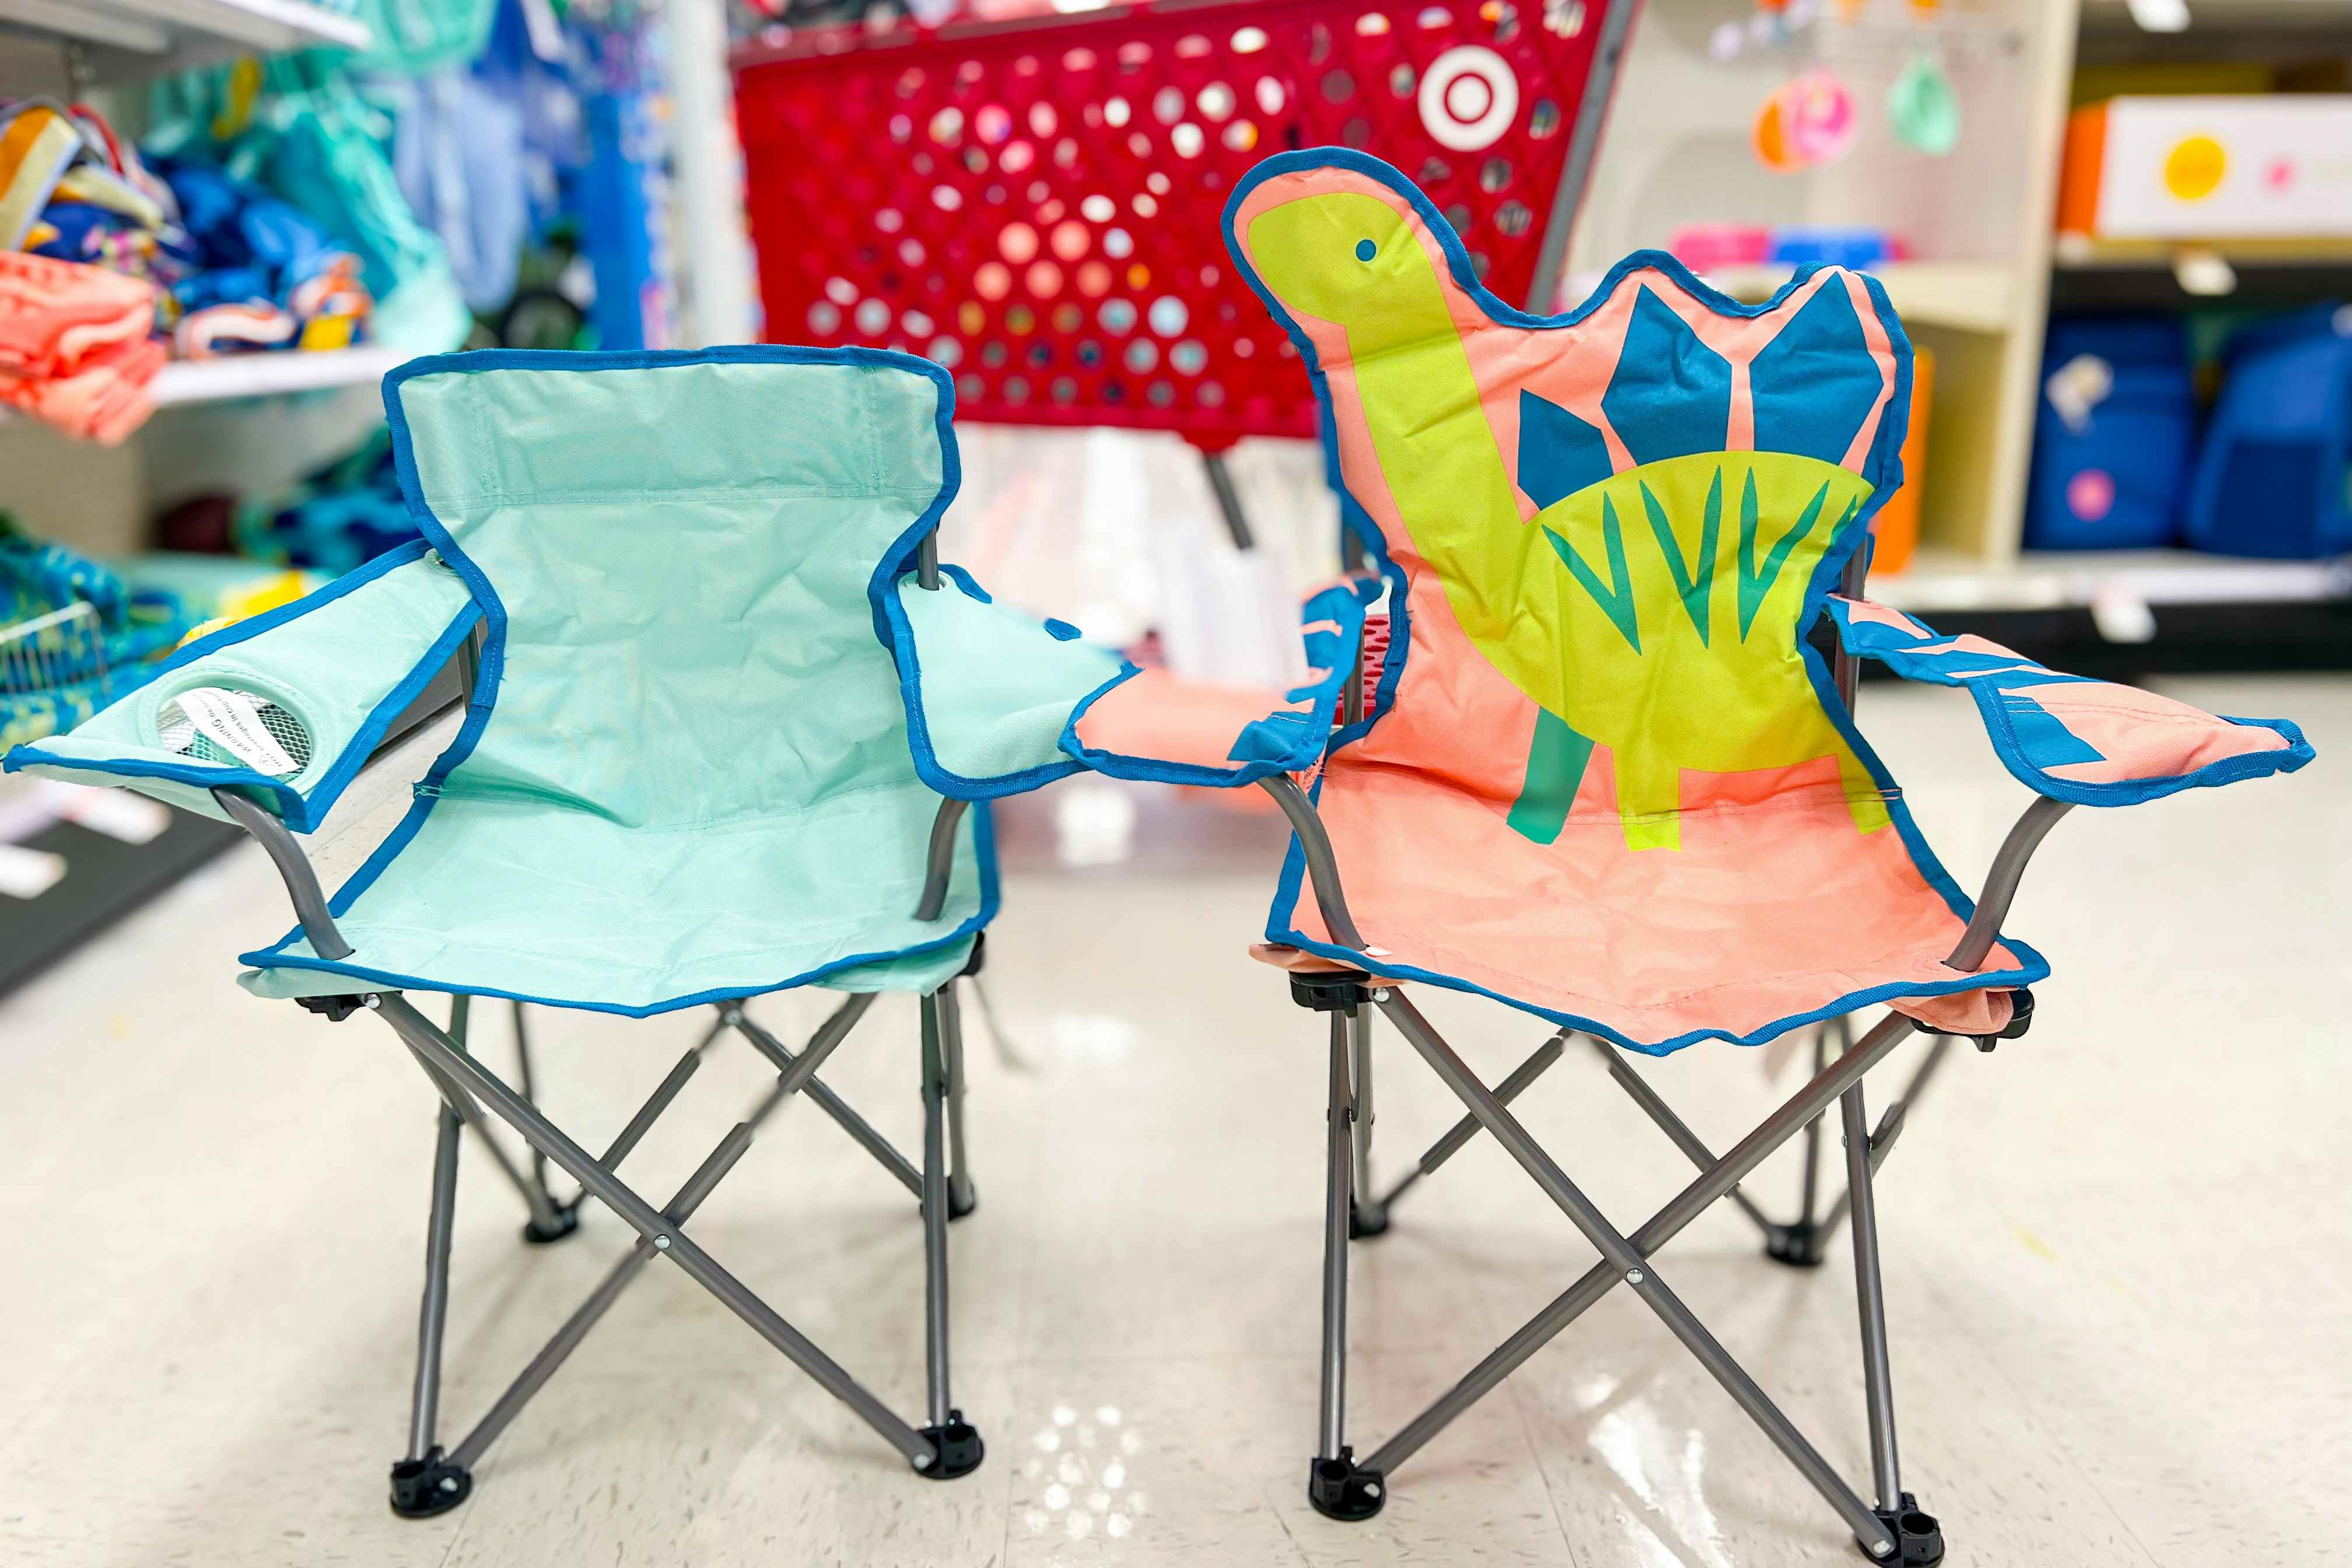 Kids' Character Quad Chairs, Only $9 at Target